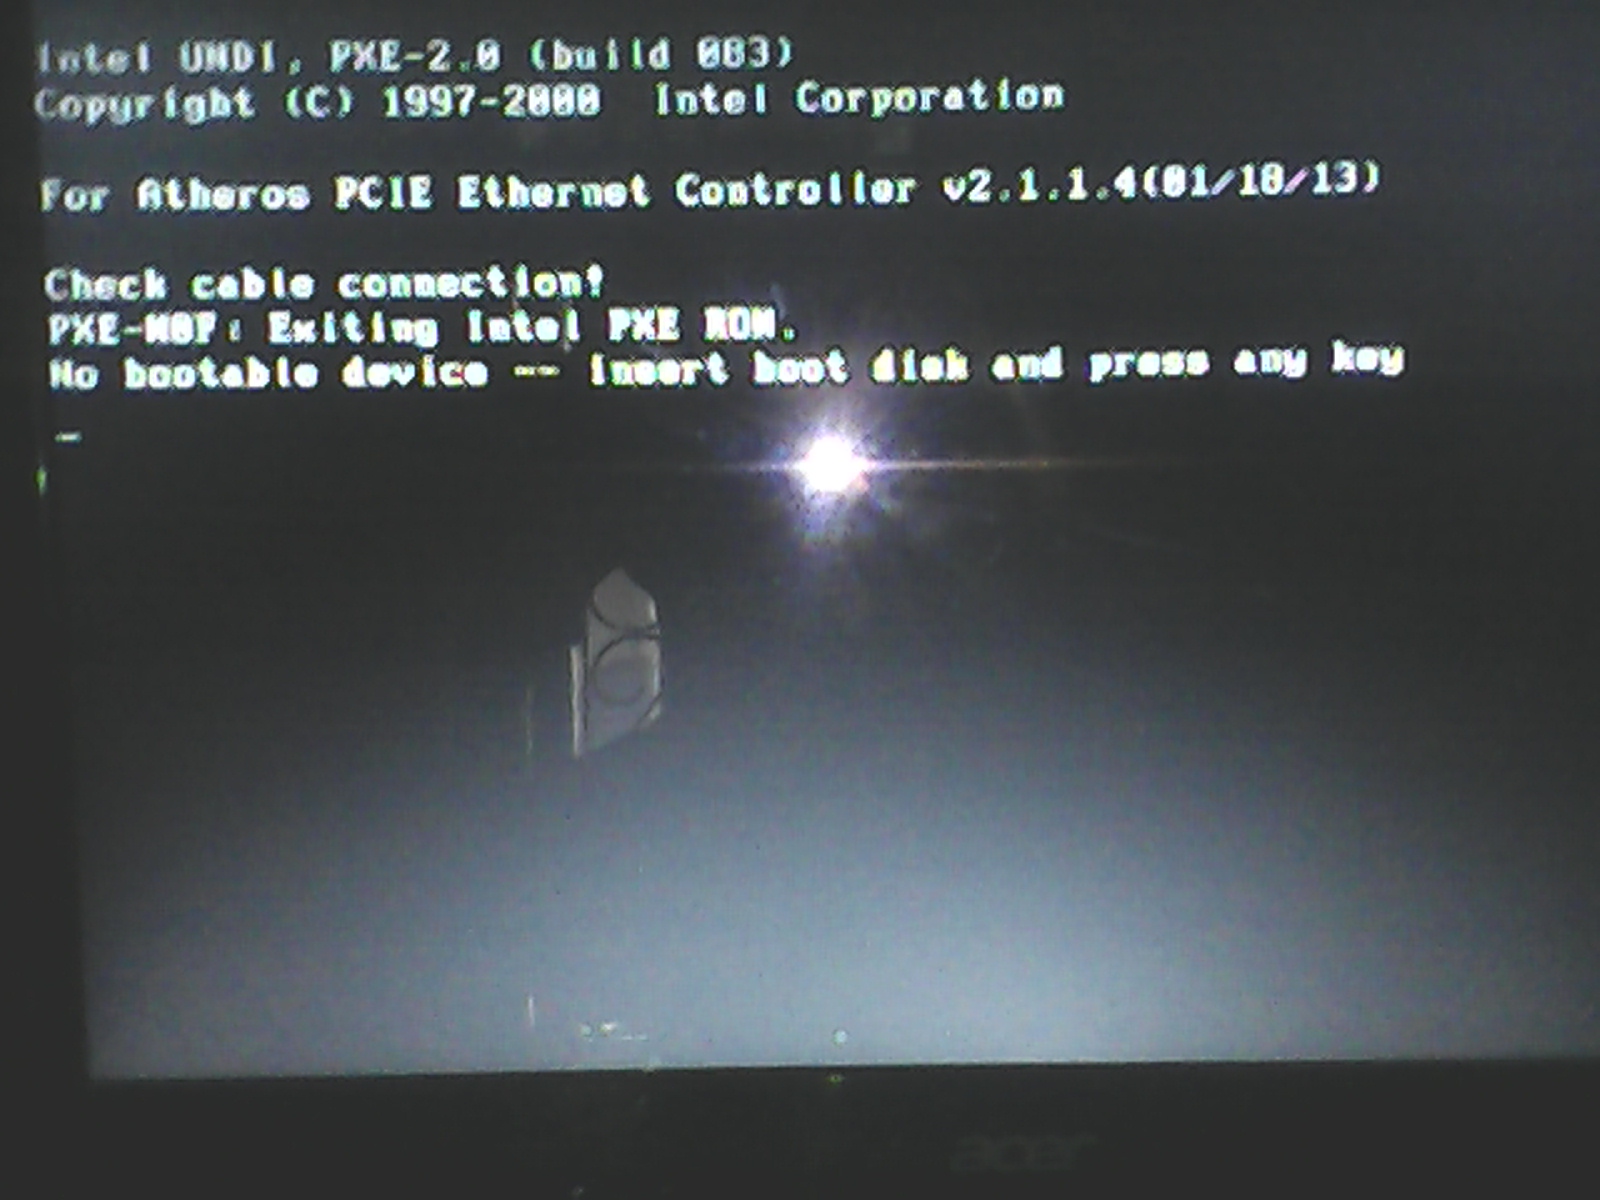 No bootable system. No Bootable device Insert Boot Disk and Press any Key на ноутбуке. Disk Boot failure Insert System Disk and Press enter. No Bootable device Божья коровка. No Bootable device Insert Boot Disk and Press any Key перевод на русский.